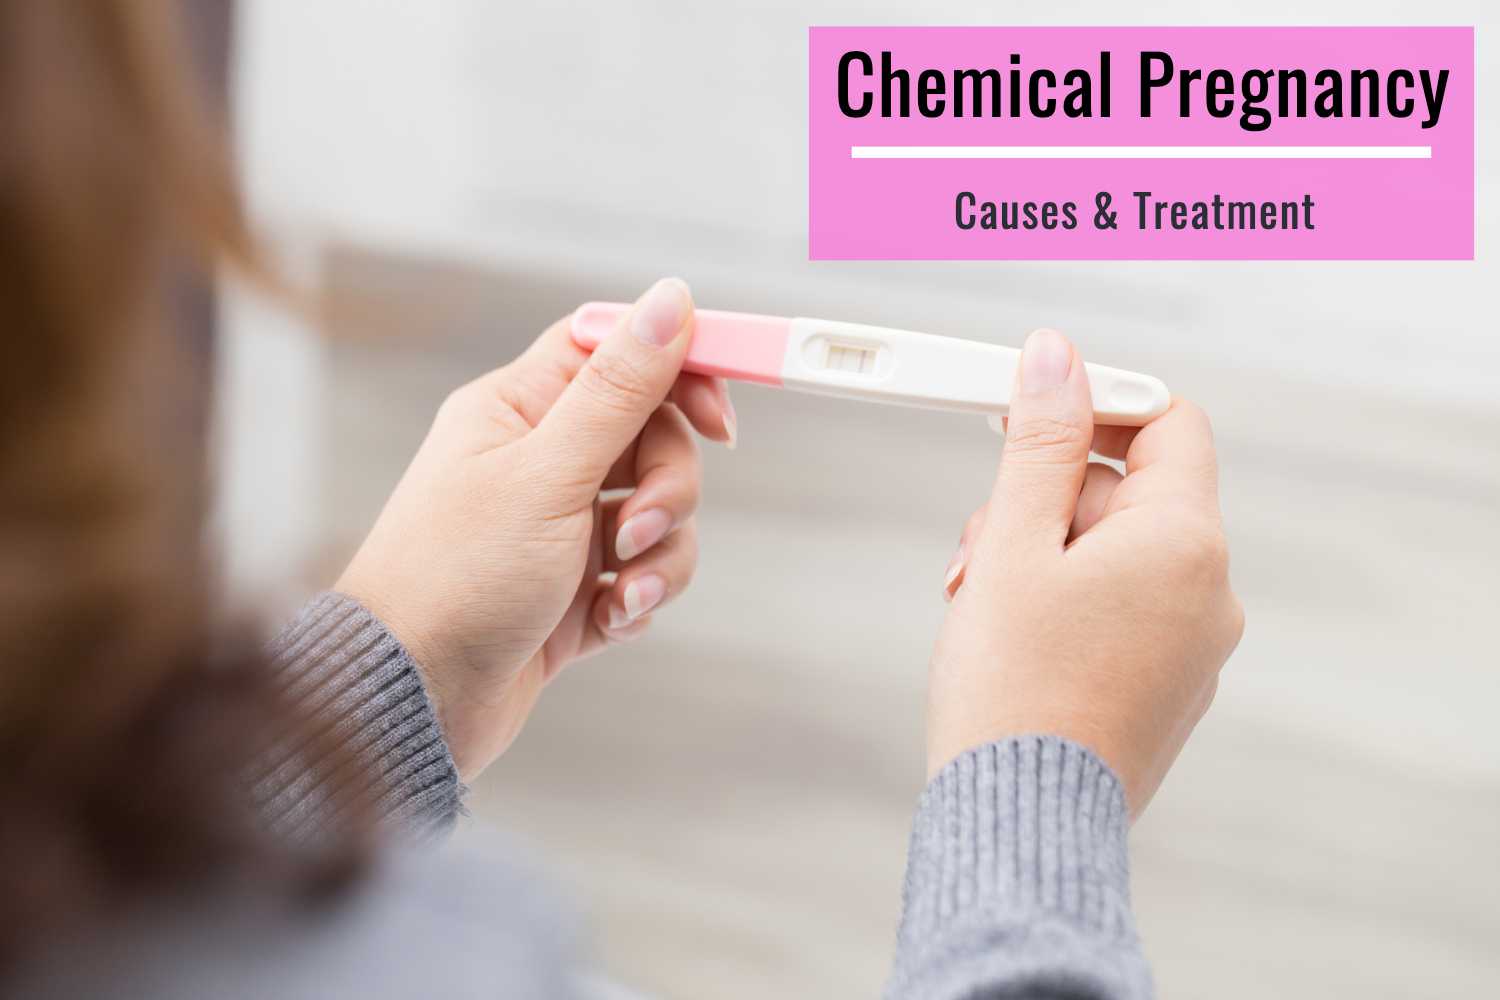 Chemical Pregnancy: Causes & Treatment